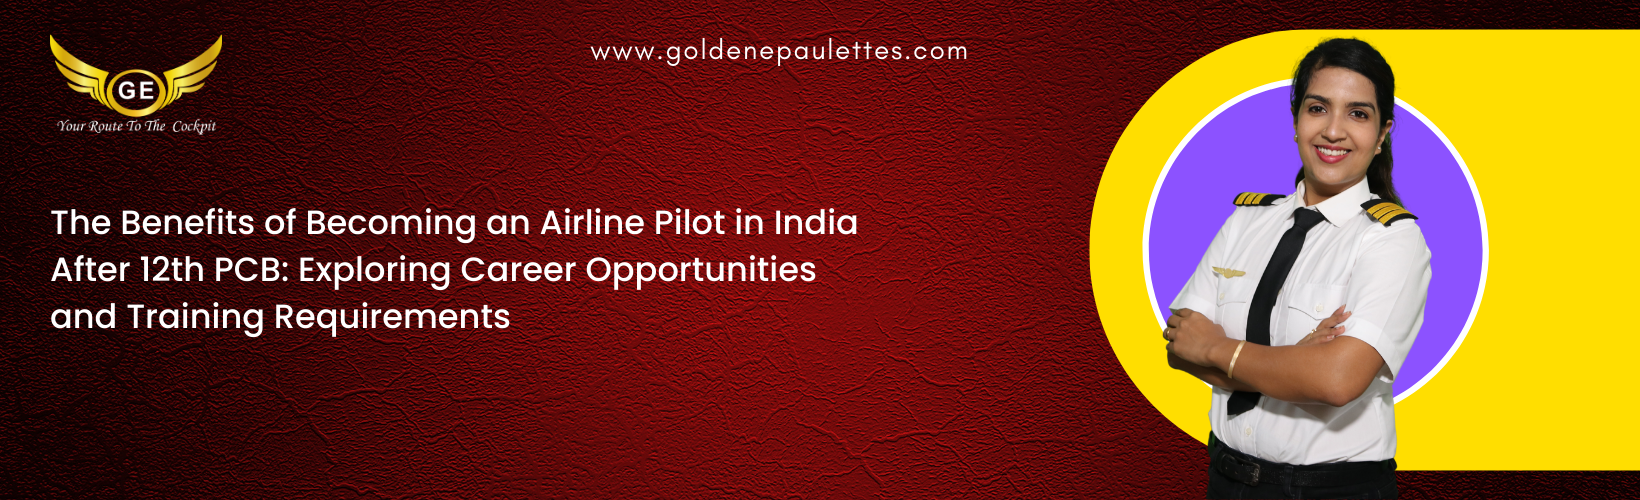 The Benefits of Becoming a Pilot in India After 12th PCB